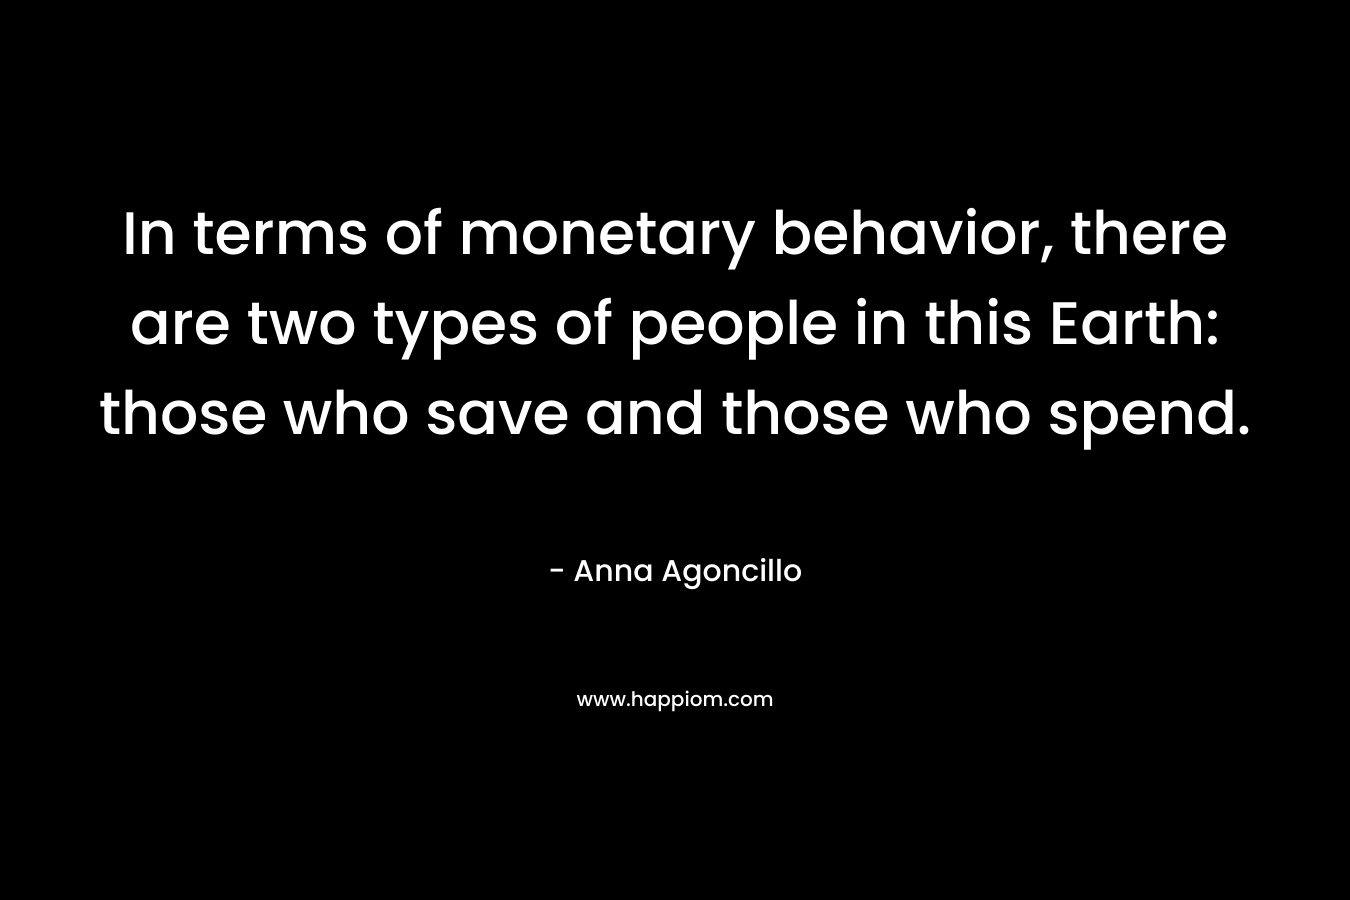 In terms of monetary behavior, there are two types of people in this Earth: those who save and those who spend. – Anna Agoncillo